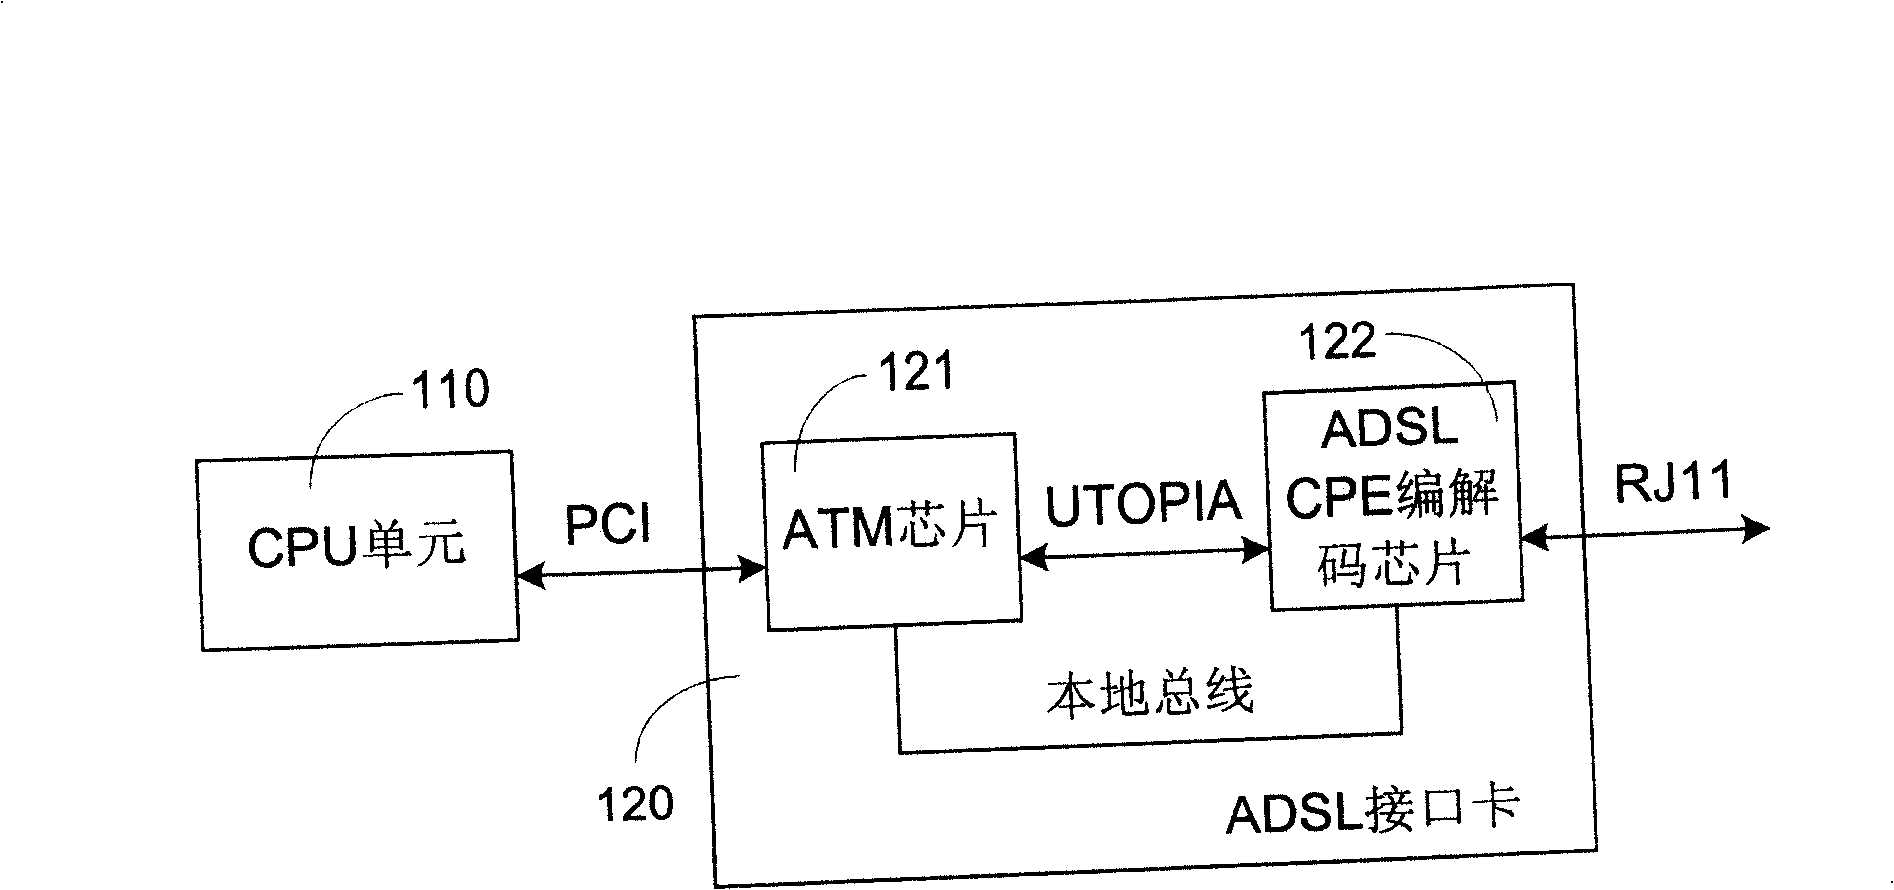 Asymmetrical digital loop routing equipment and interface card